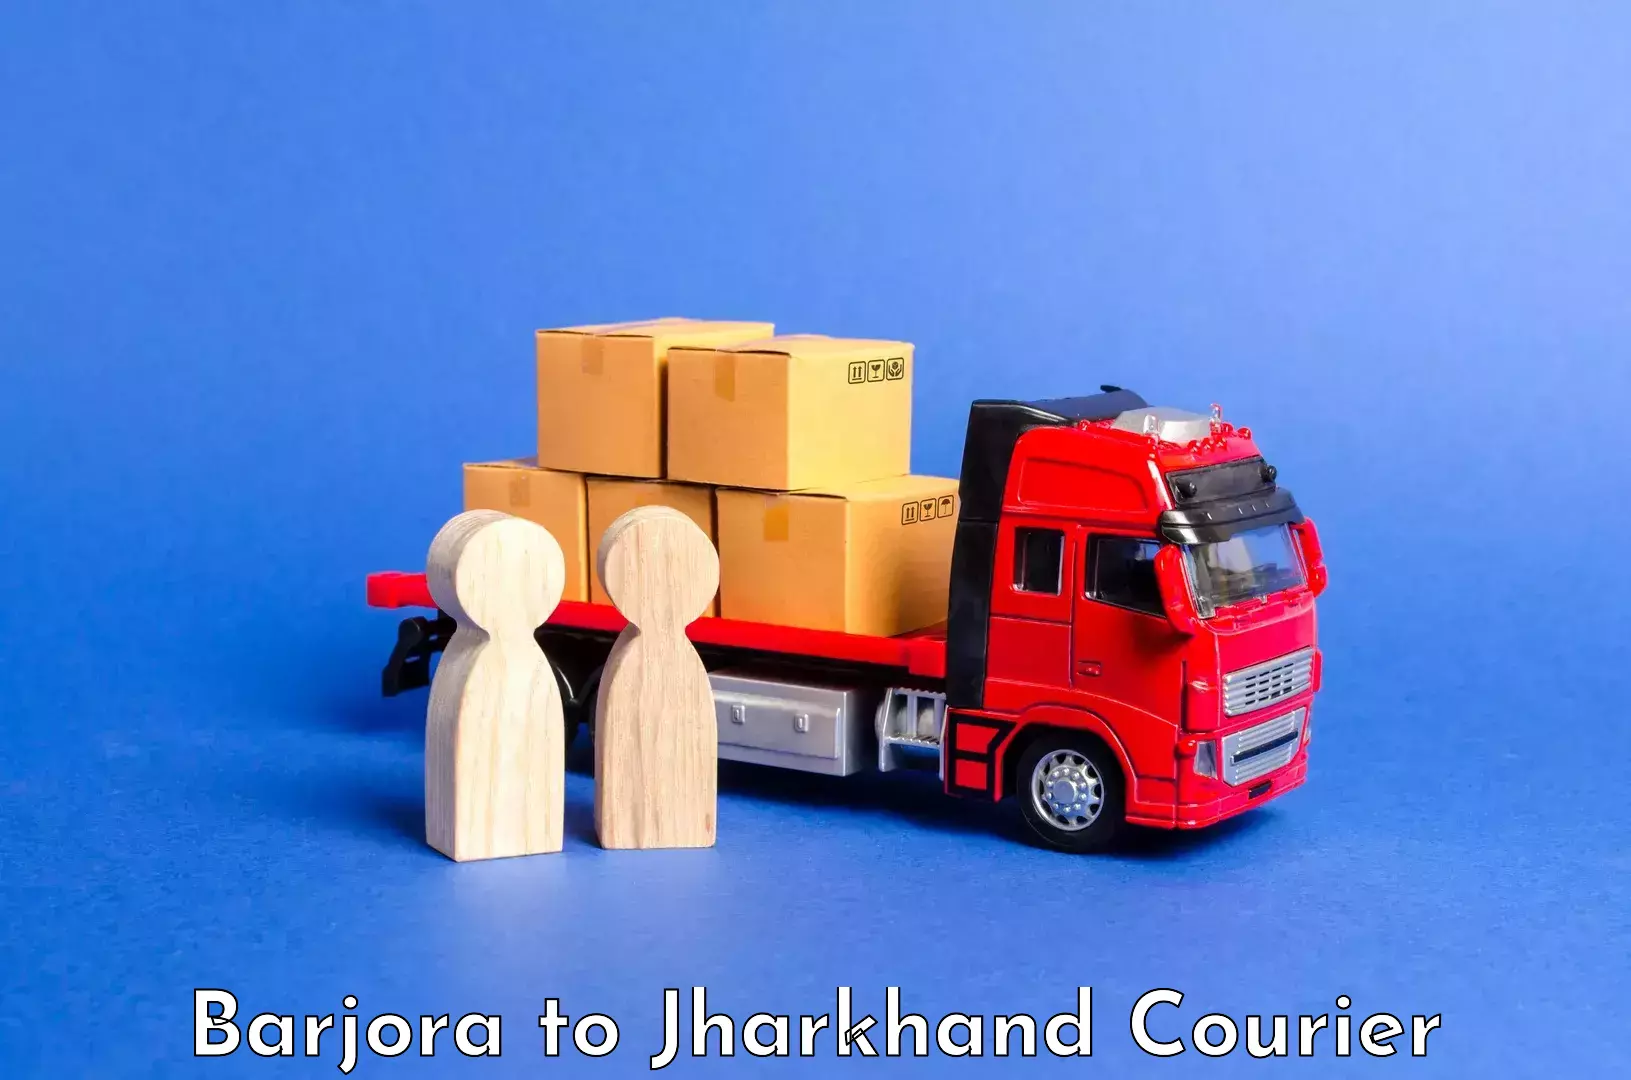 Luggage courier network Barjora to Dhanbad